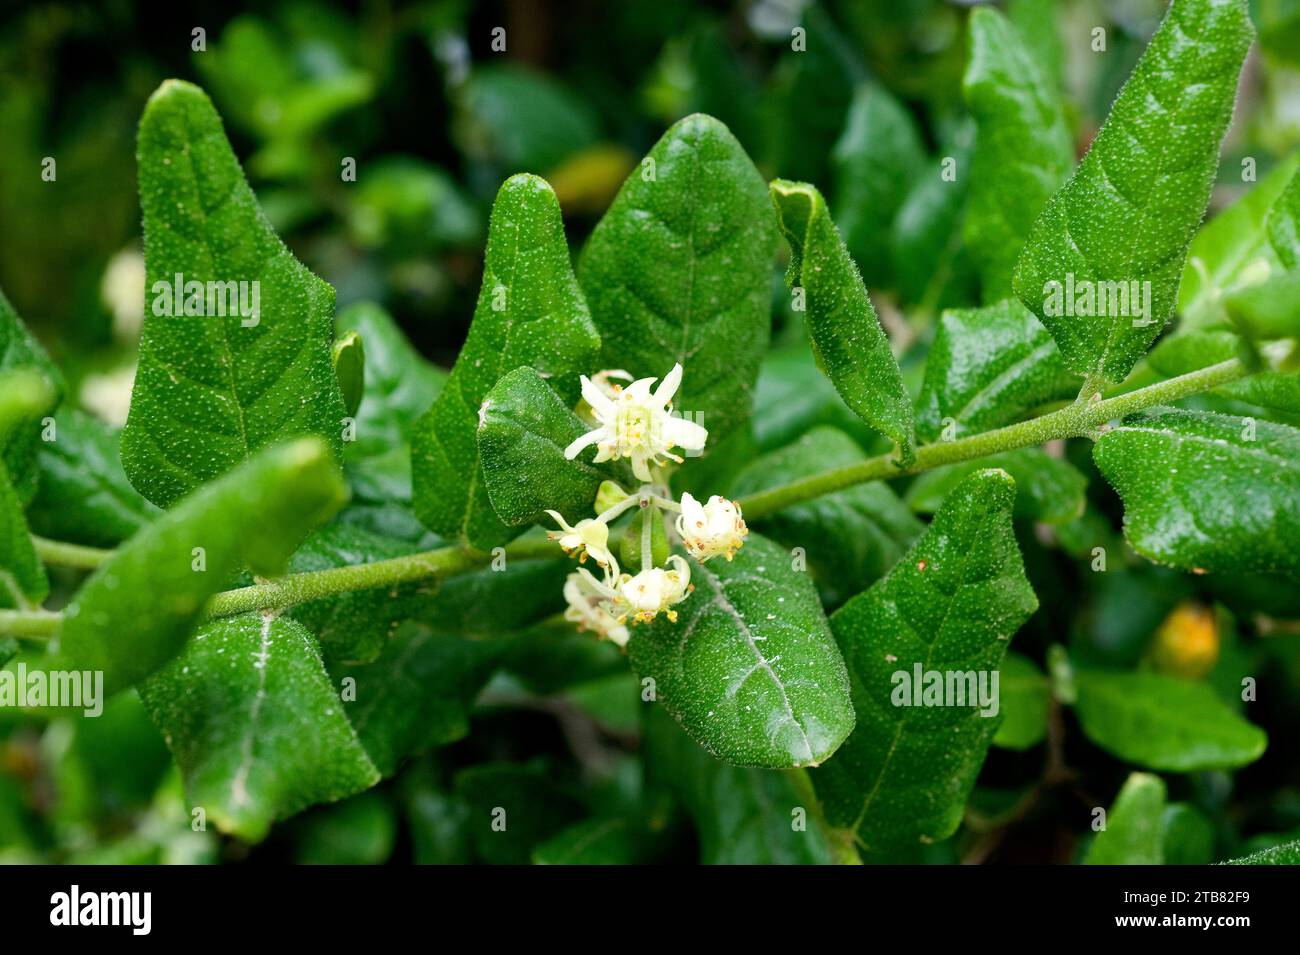 Boldo (Peumus boldus) is a tree endemic to Chile. Its leaves are used for culinary and medicinal purposes. Stock Photo